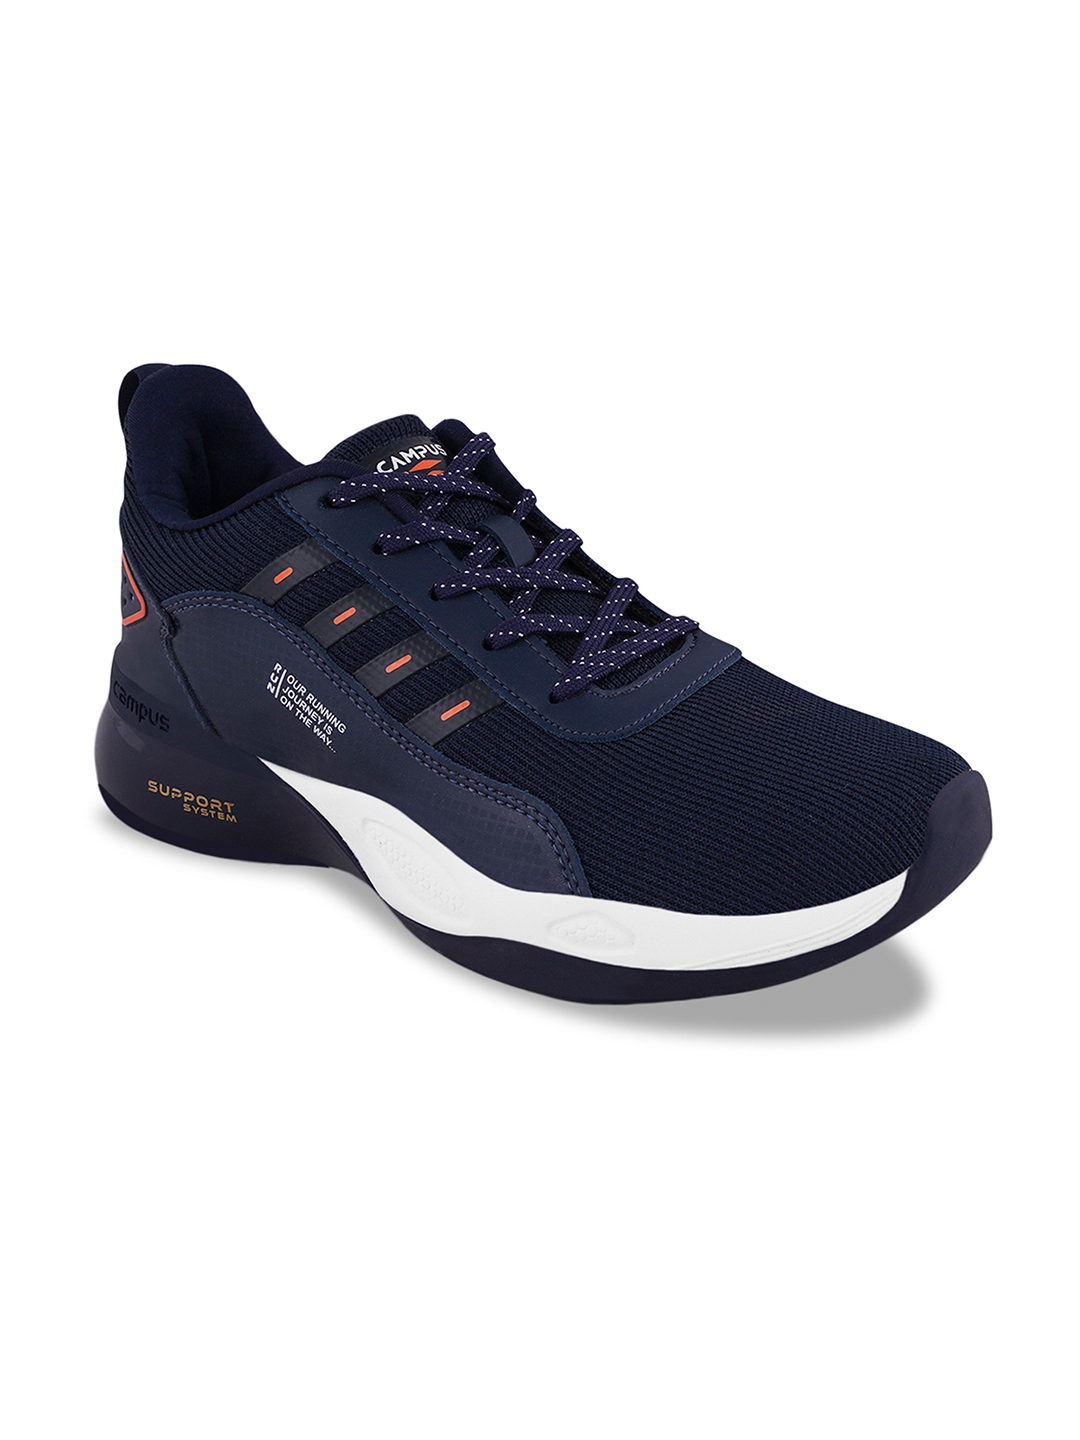 Buy Campus Men Navy Blue Mesh Running Shoes - Sports Shoes for Men ...